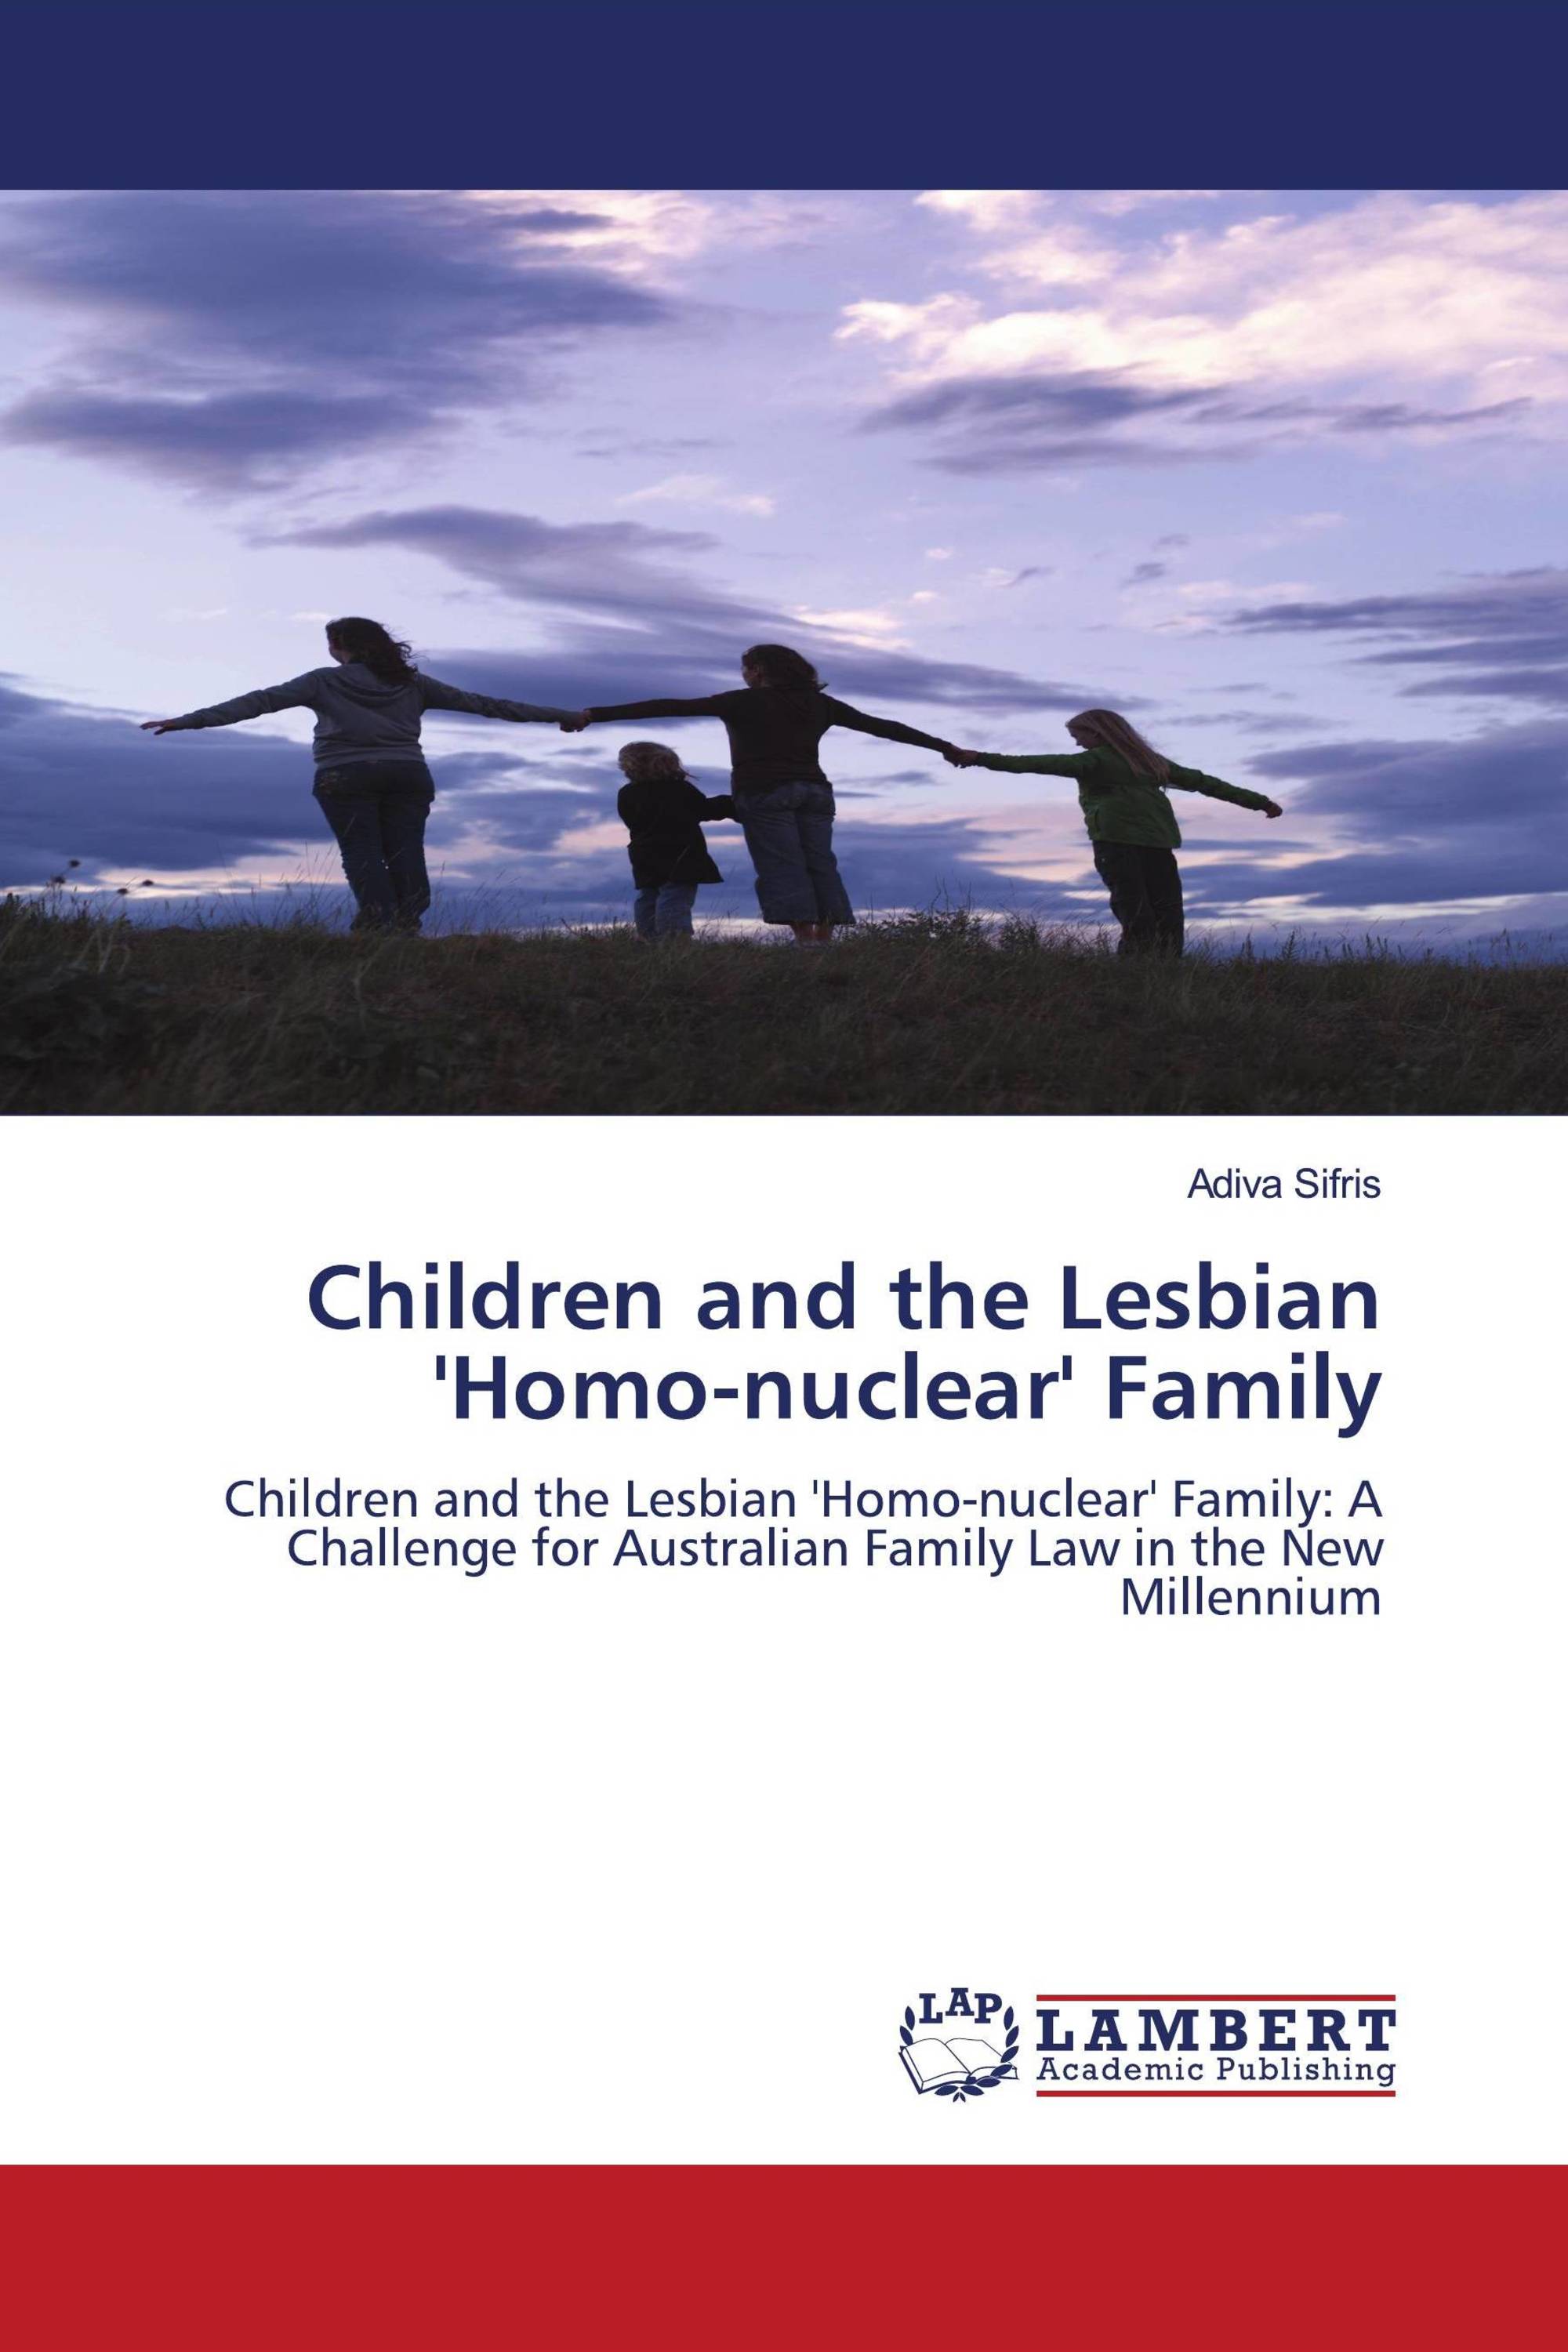 Children and the Lesbian 'Homo-nuclear' Family